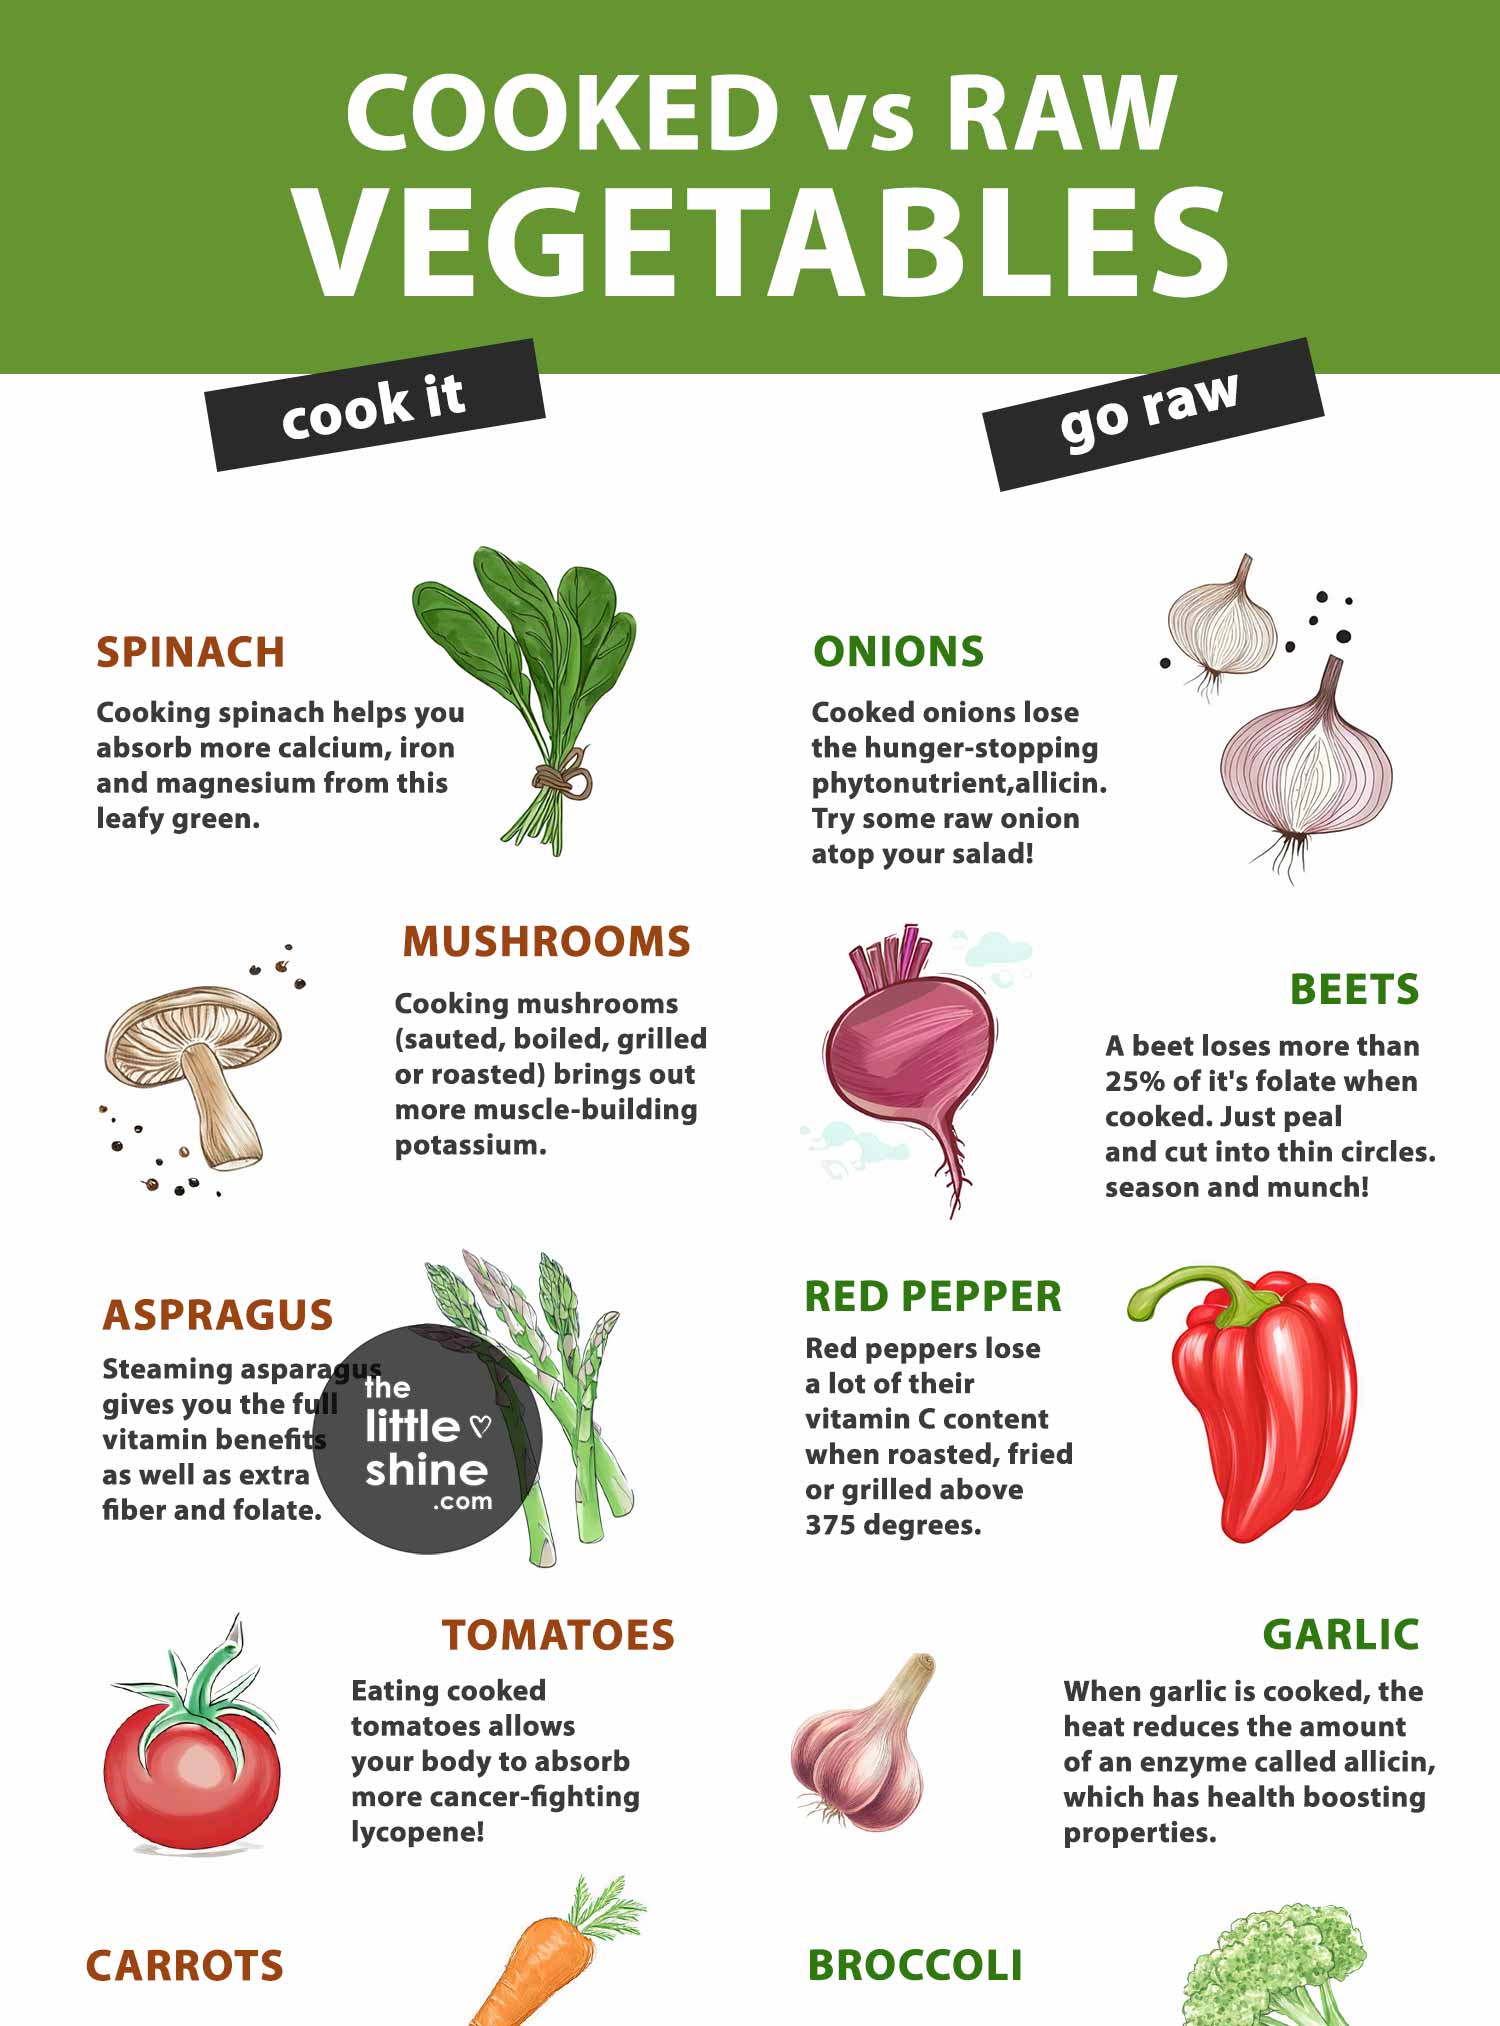 Vegetables That Are Better Raw and Cooked